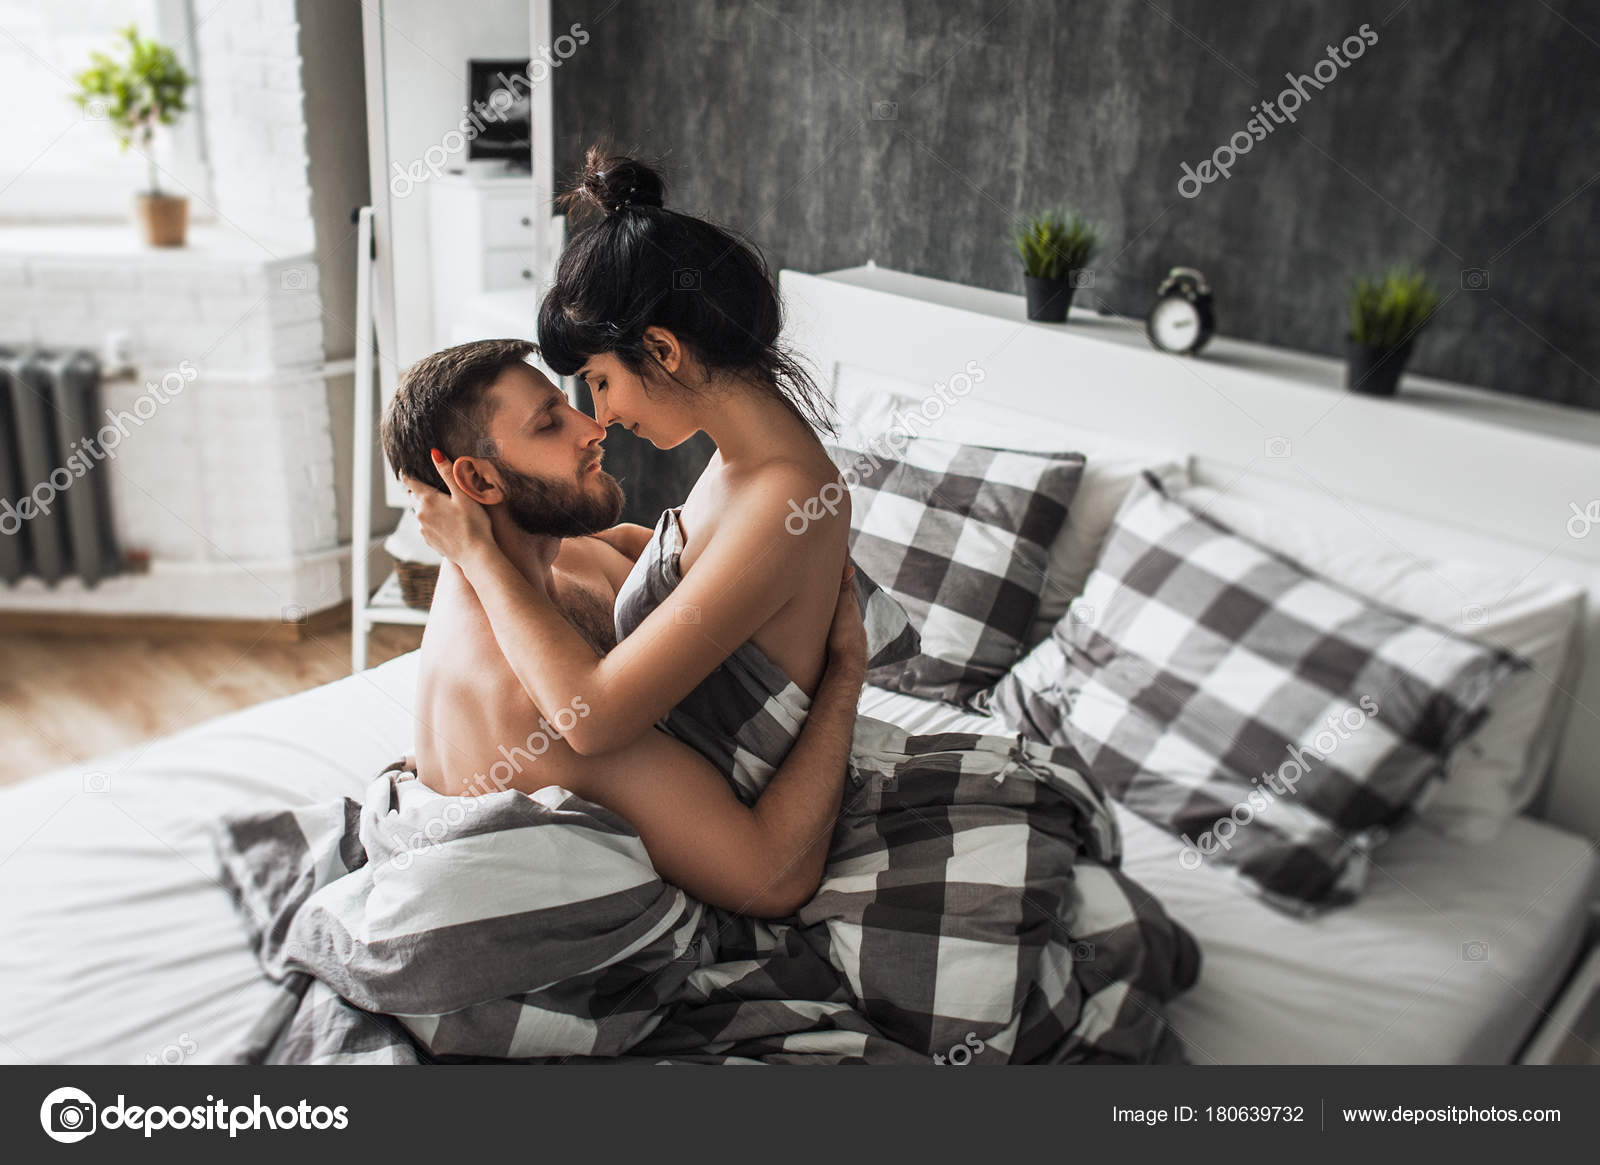 husband and wife making love in bed